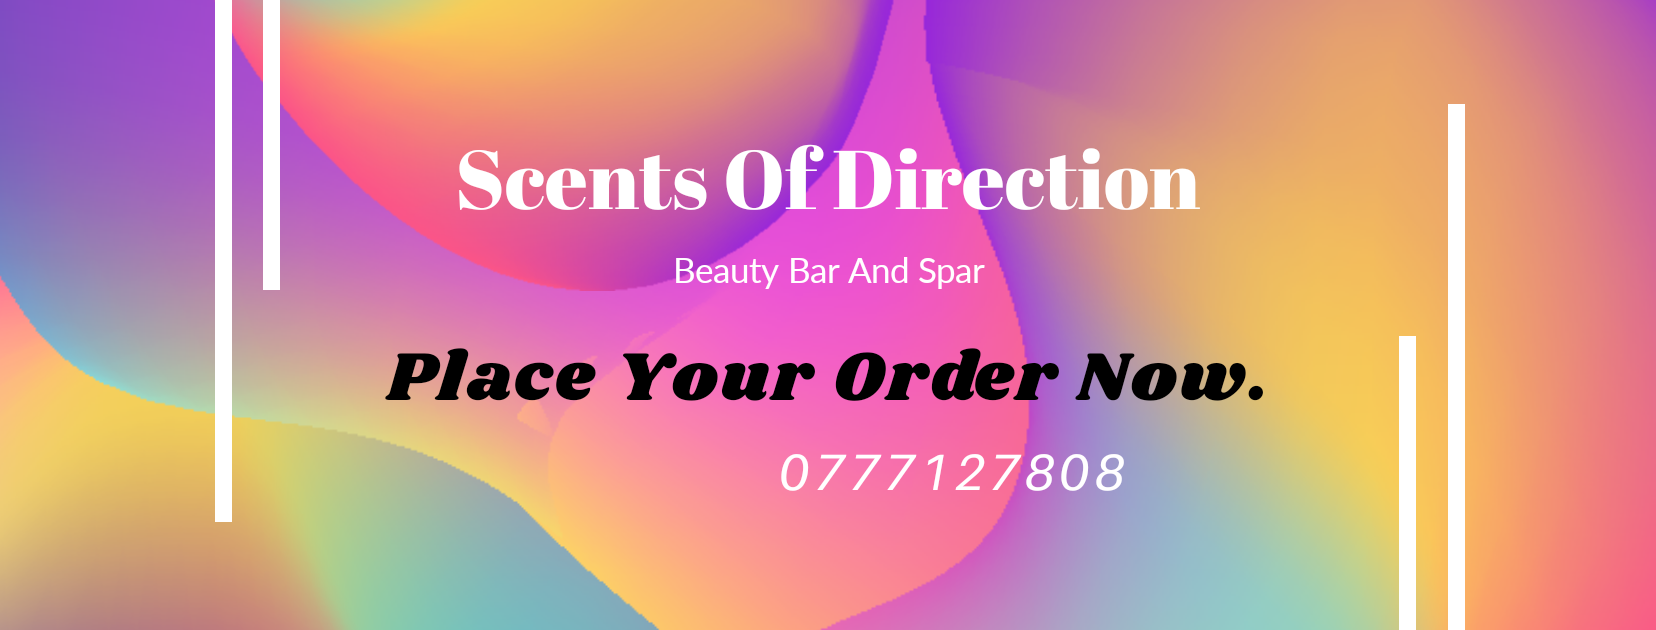 In Need Of Any Beauty Products, Scents Of Direction Is Here For You.